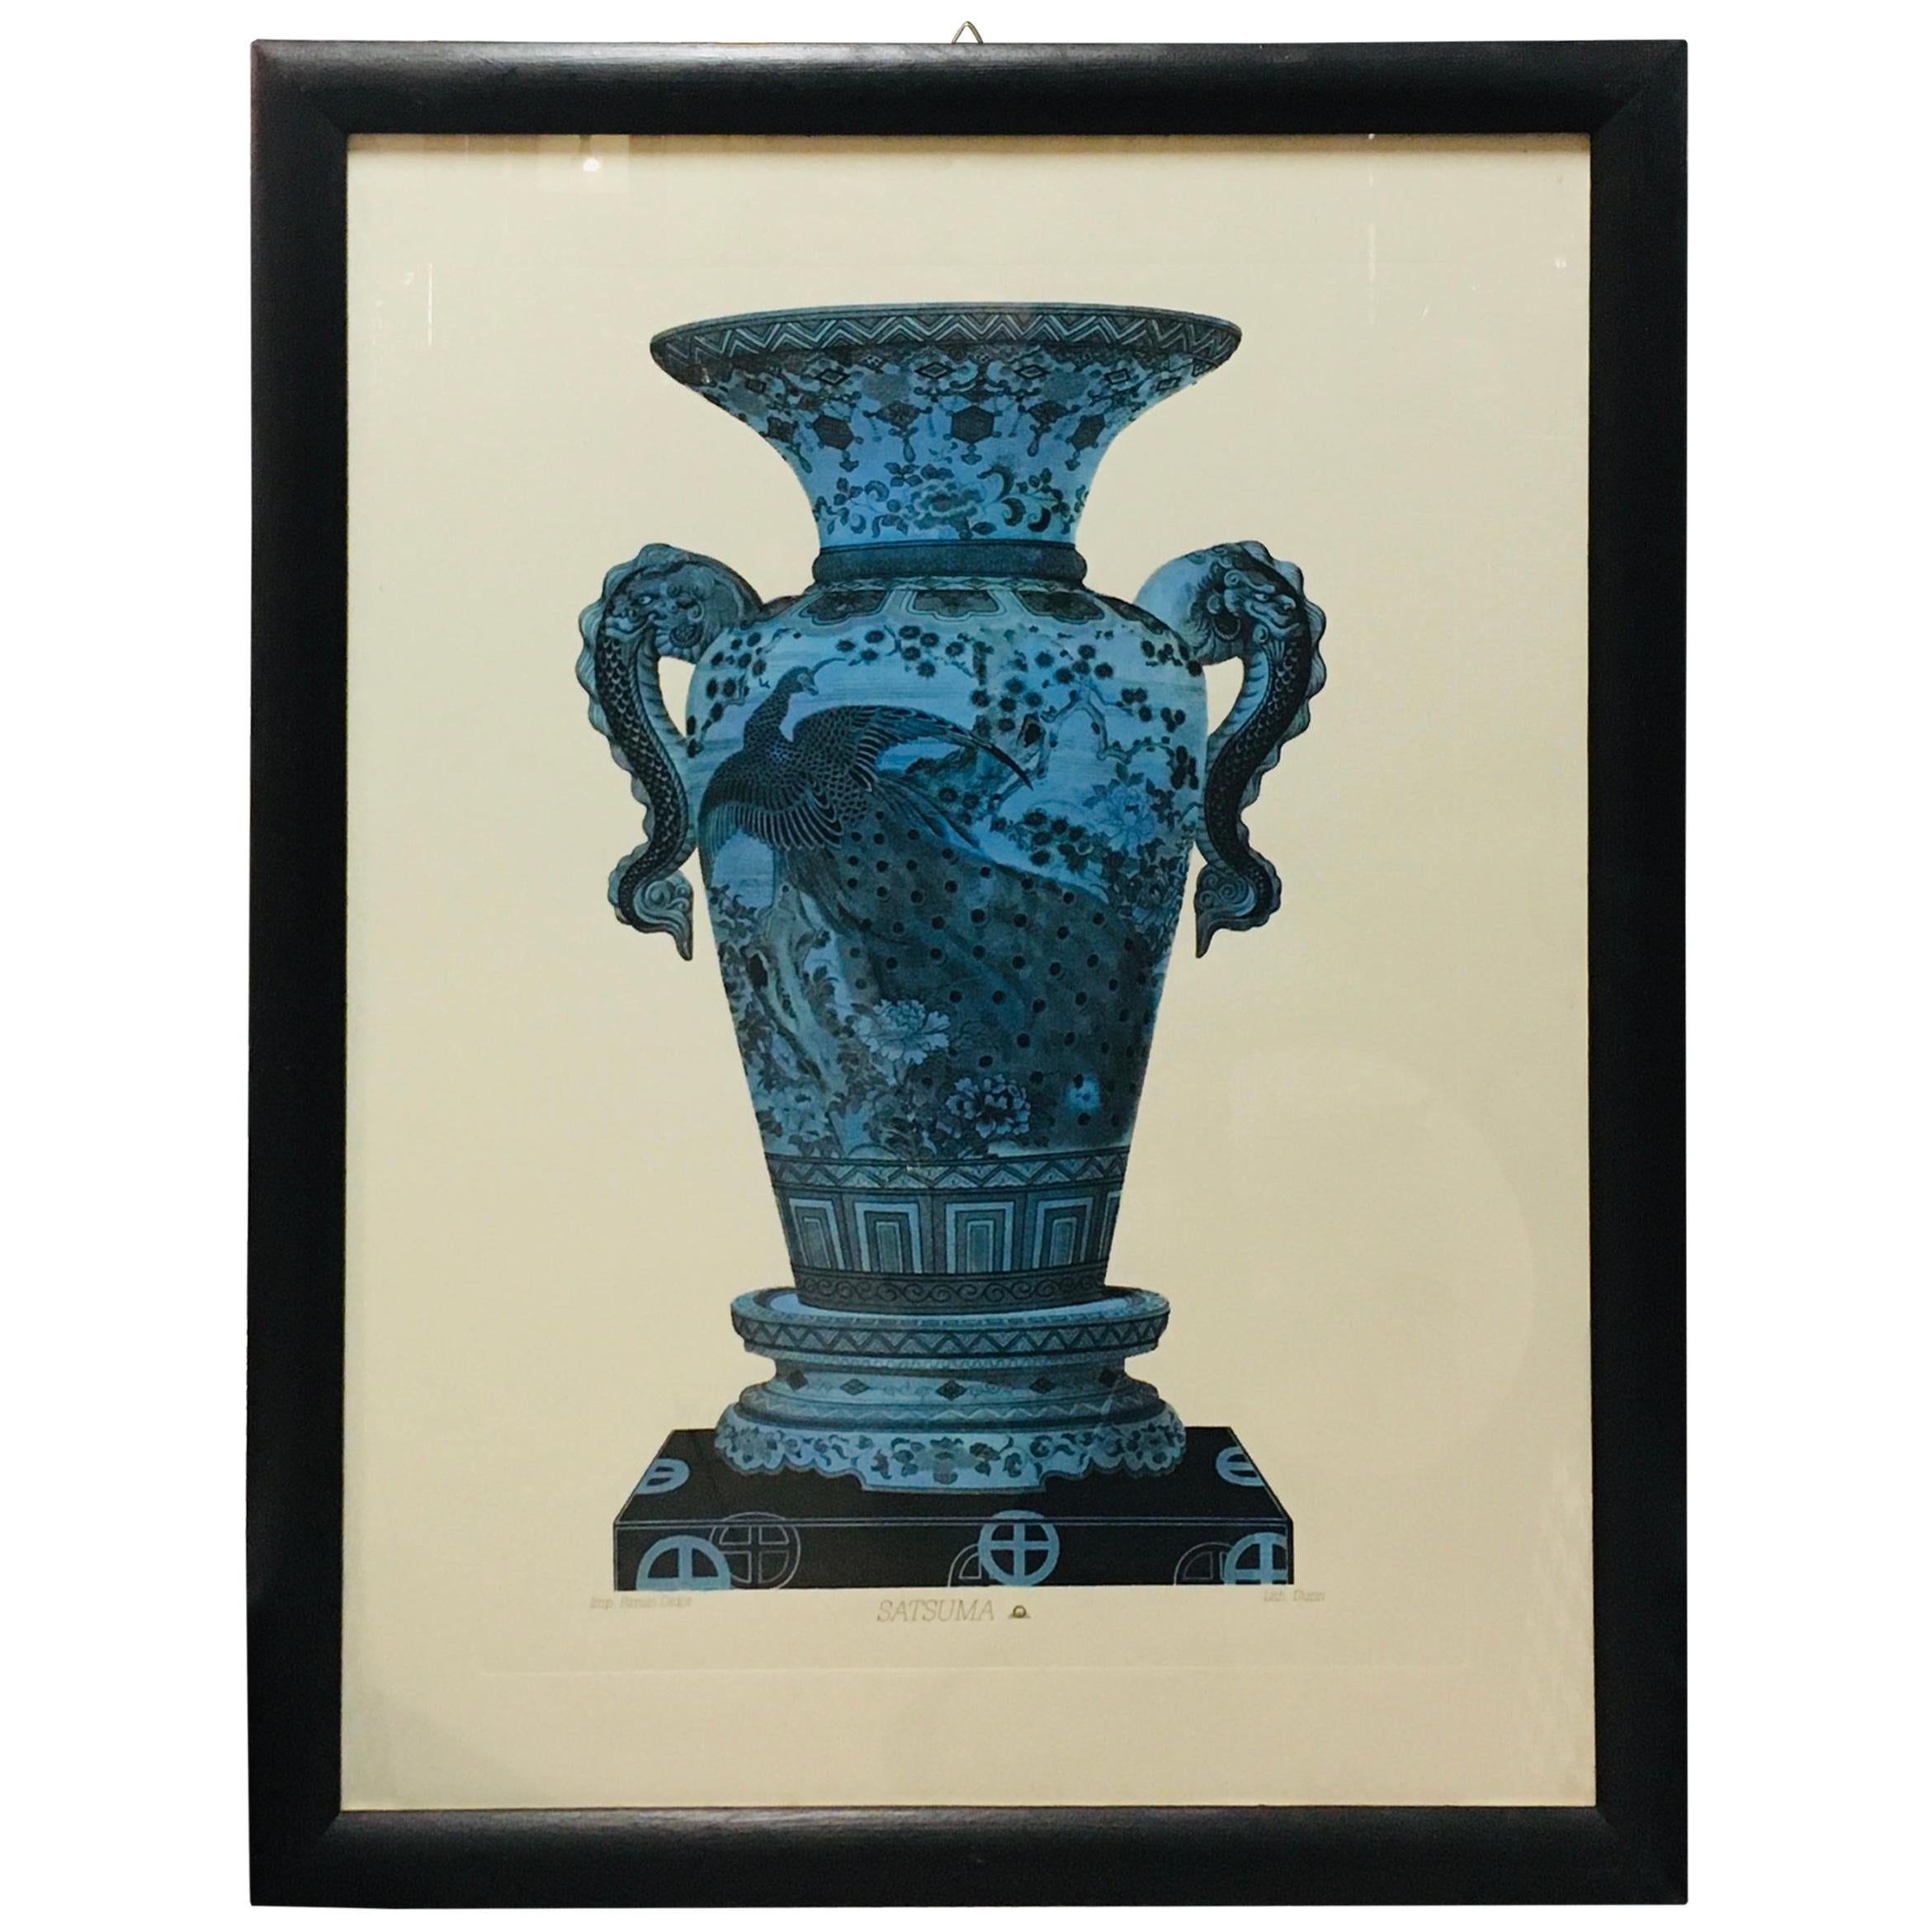  Italian Contemporary Hand Painted Blue China Vase Print with Black Frame 3 of 3 For Sale